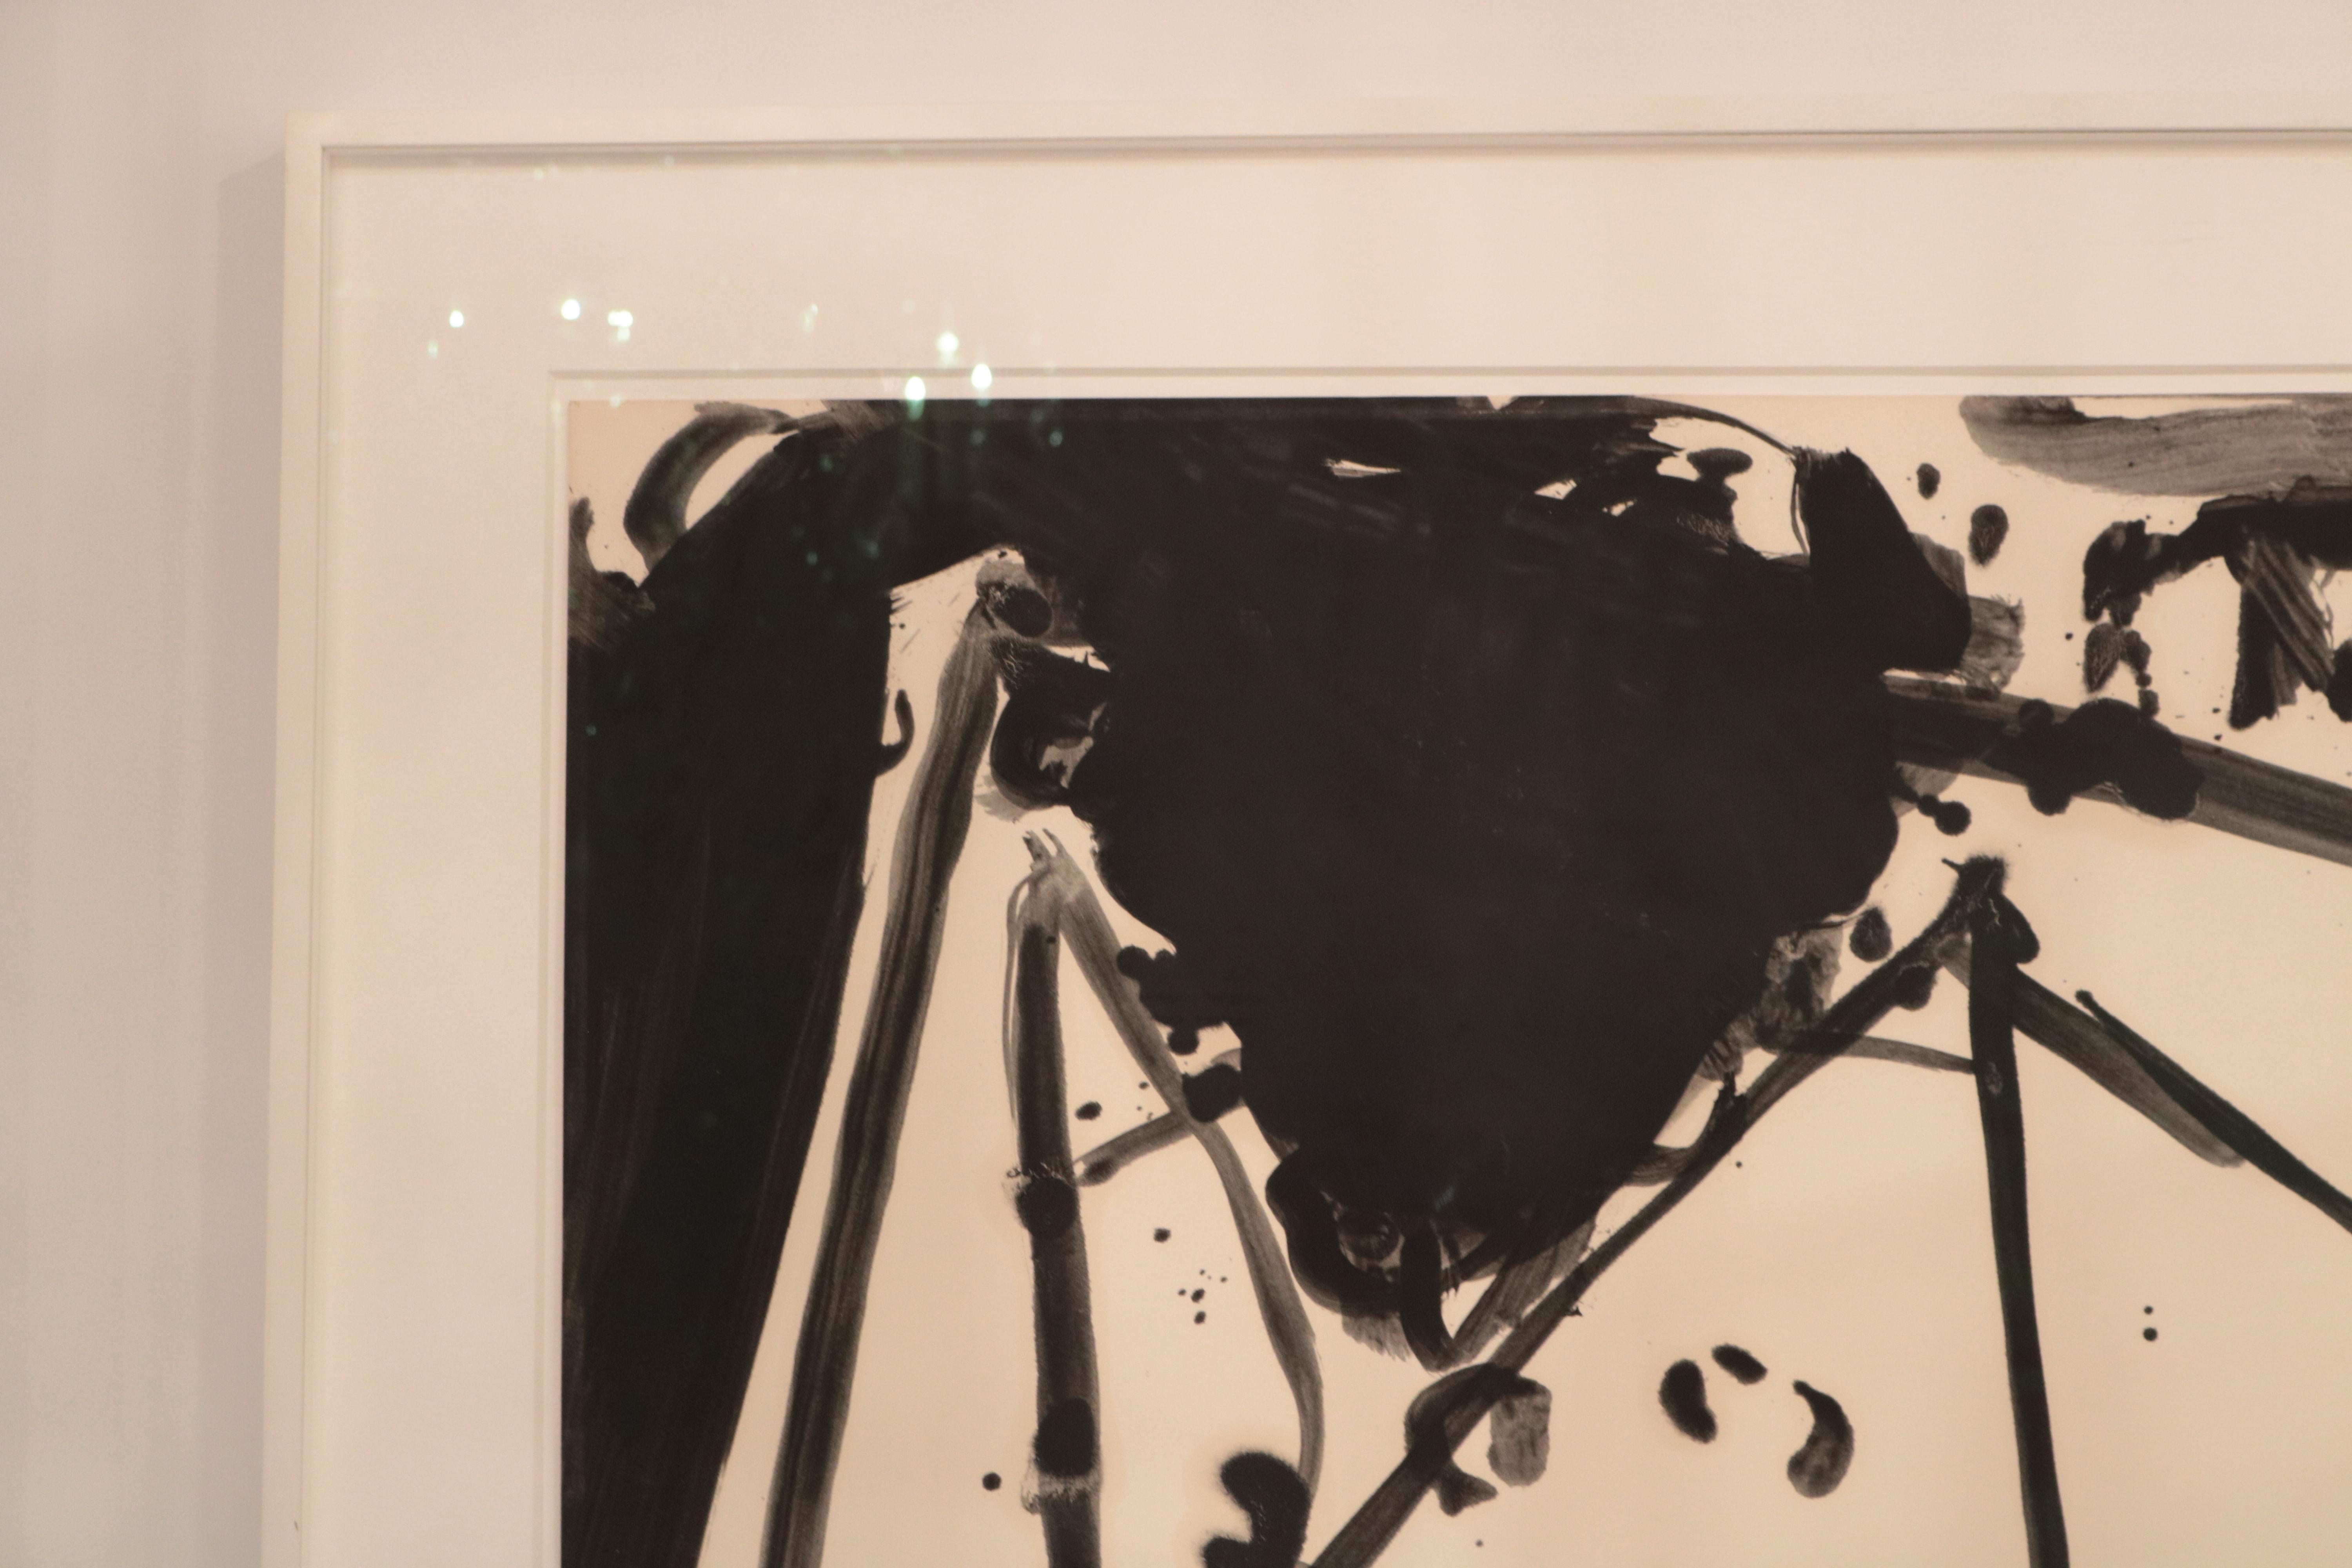 North American Robert Motherwell, Drunk with Turpentine No. 21 For Sale